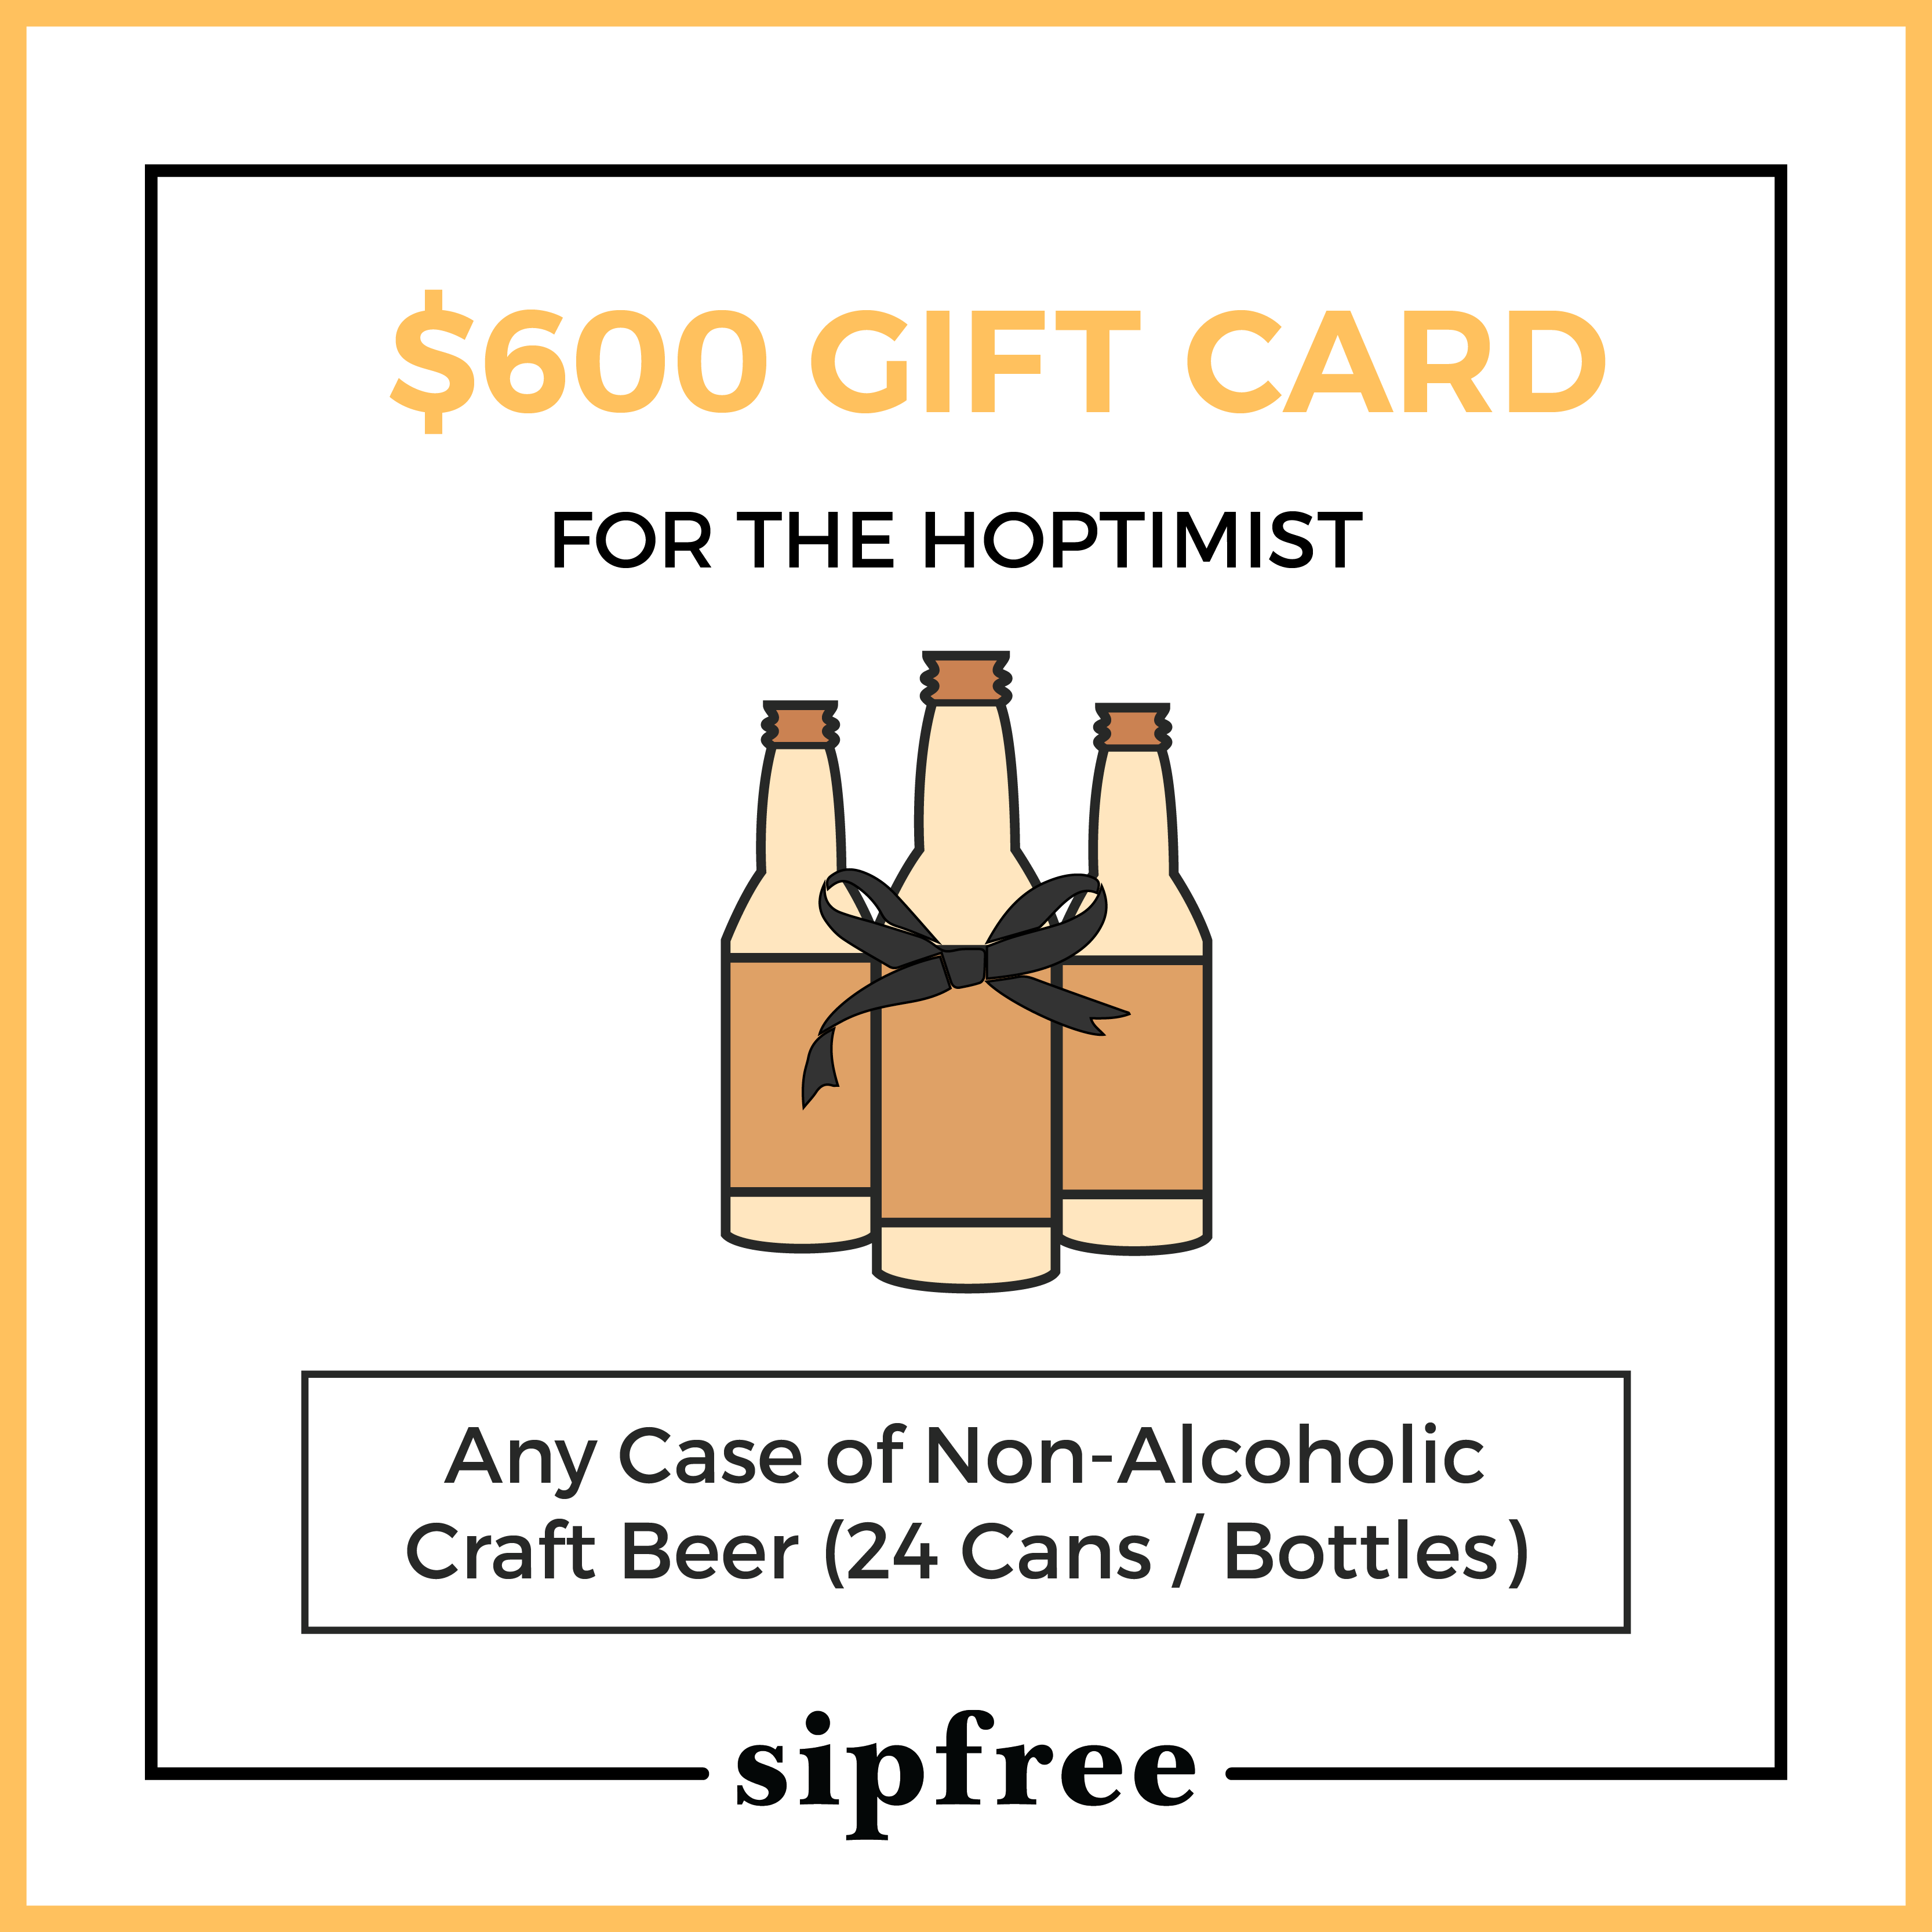 Non-Alcoholic Craft Beer Gift